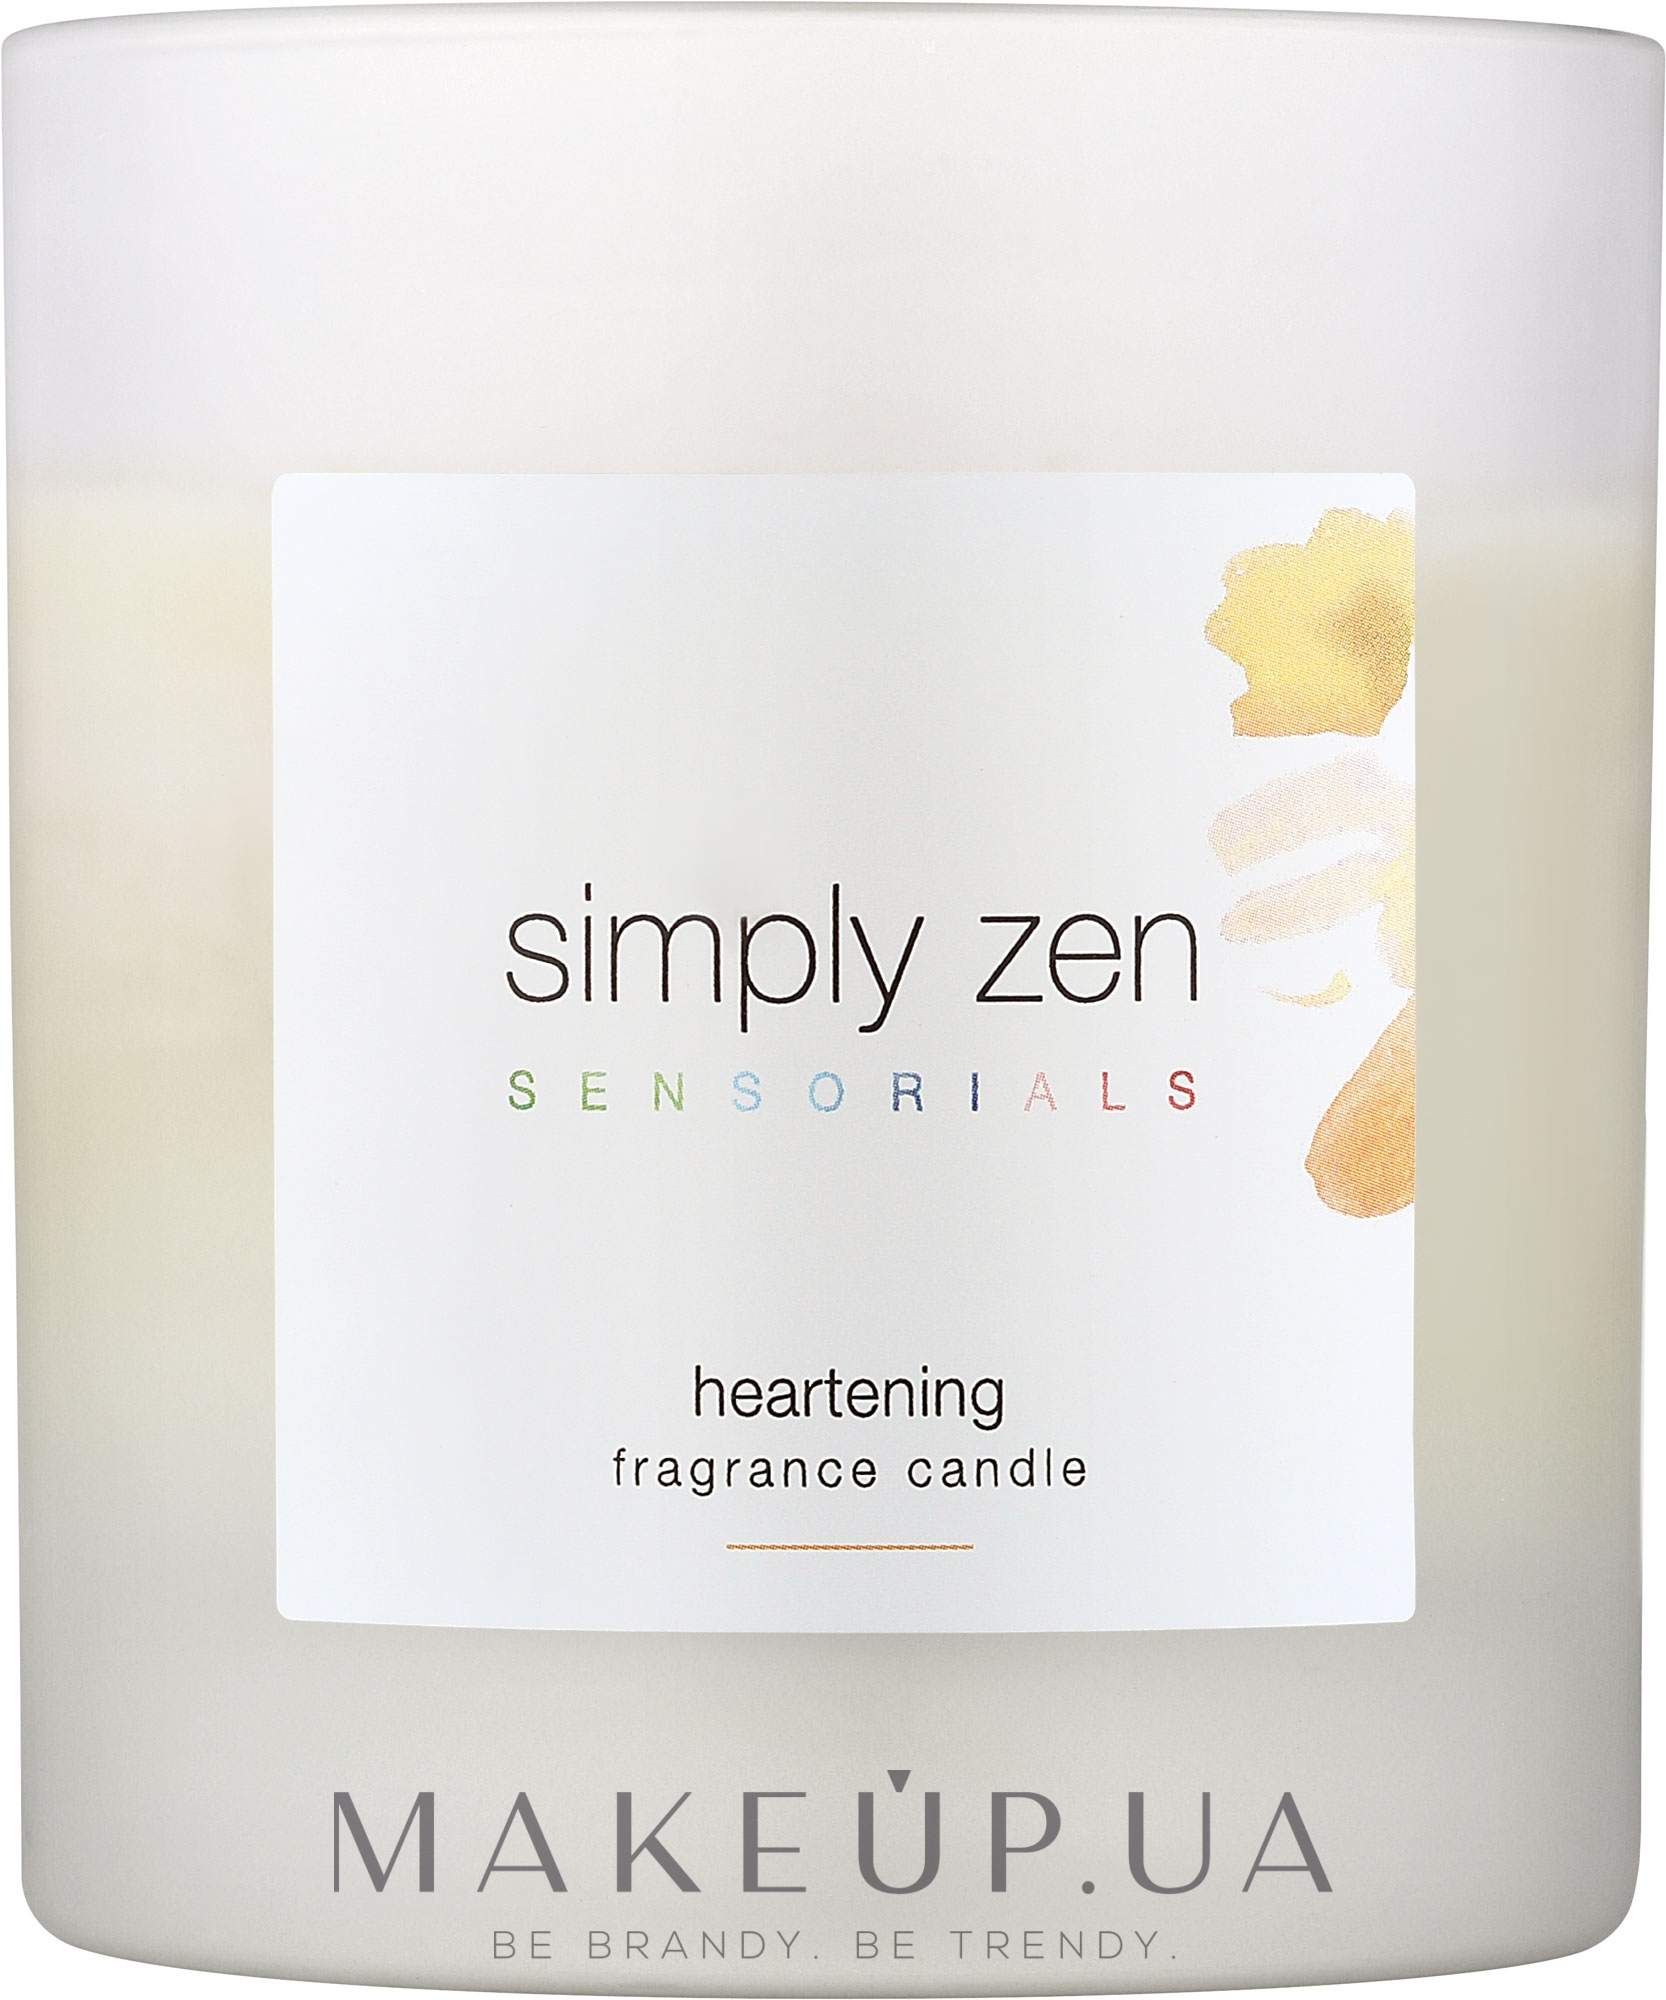 Ароматична свічка - Z. One Concept Simply Zen Scented Candle Simply Zen Sensorials Heartening — фото 240g